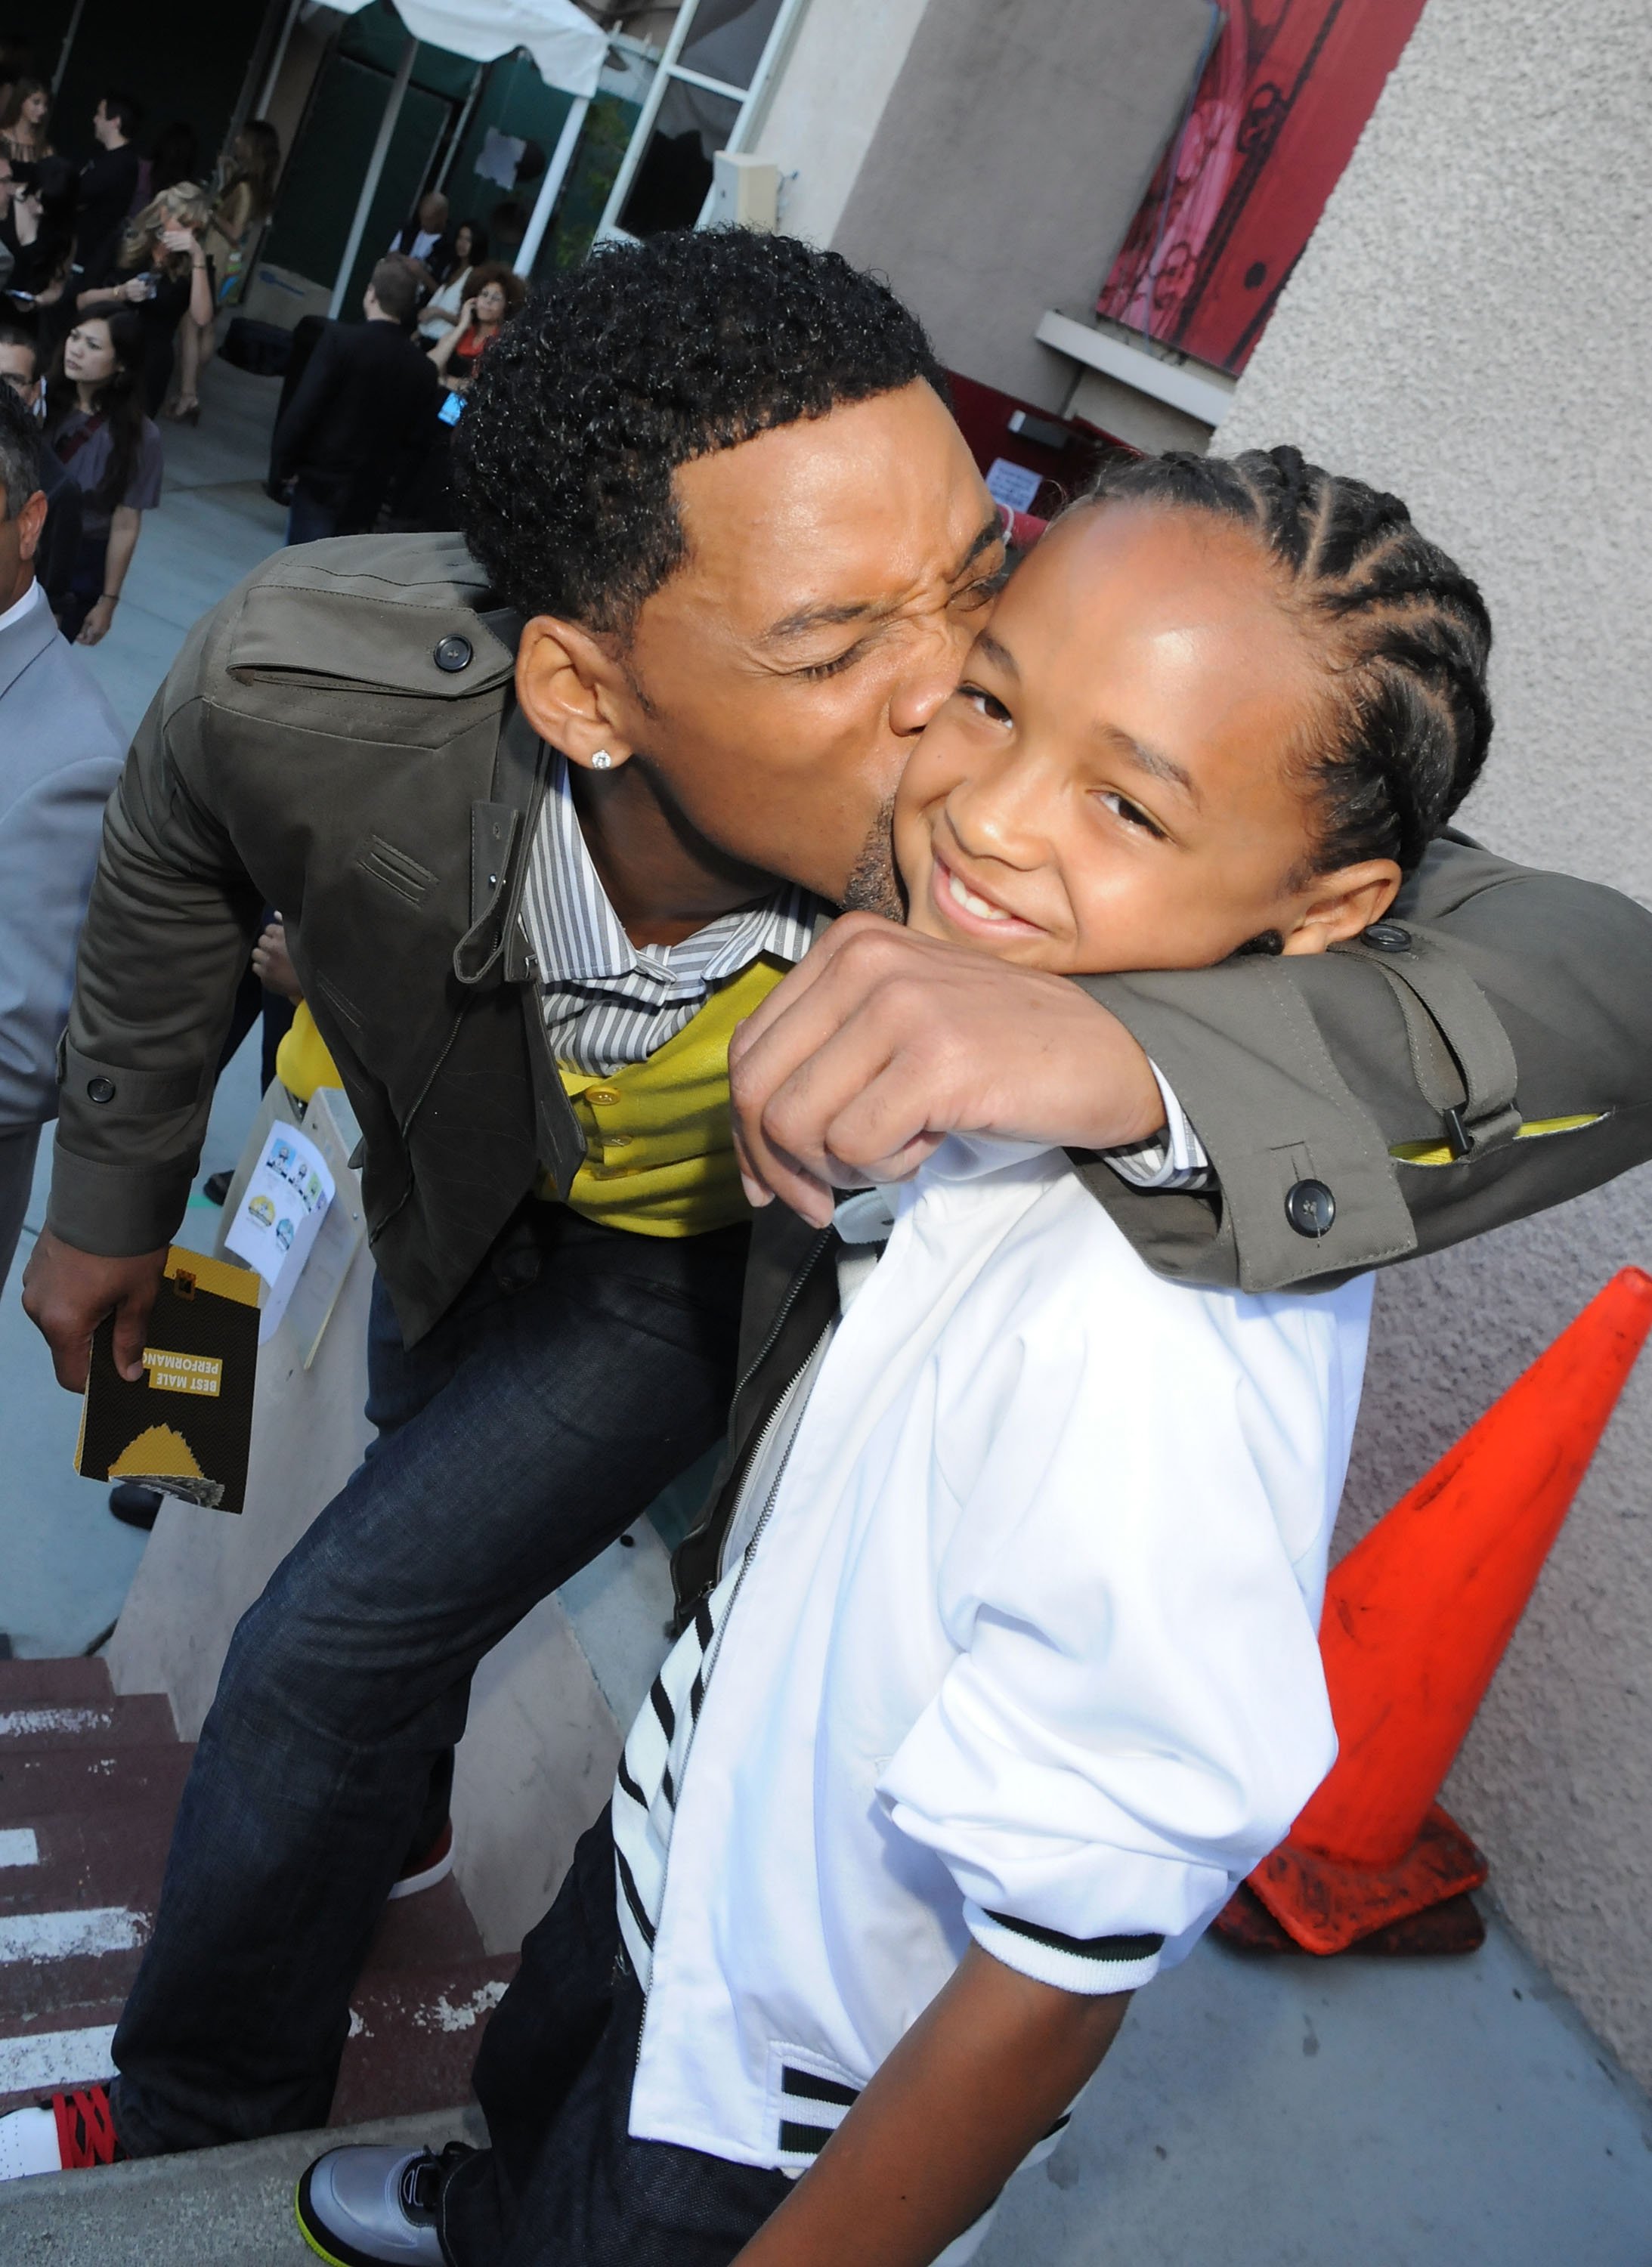 Will and Jaden Smith at the MTV Movie Awards on June 1, 2008, in Universal City, California. | Source: Jeff Kravitz/FilmMagic/Getty Images